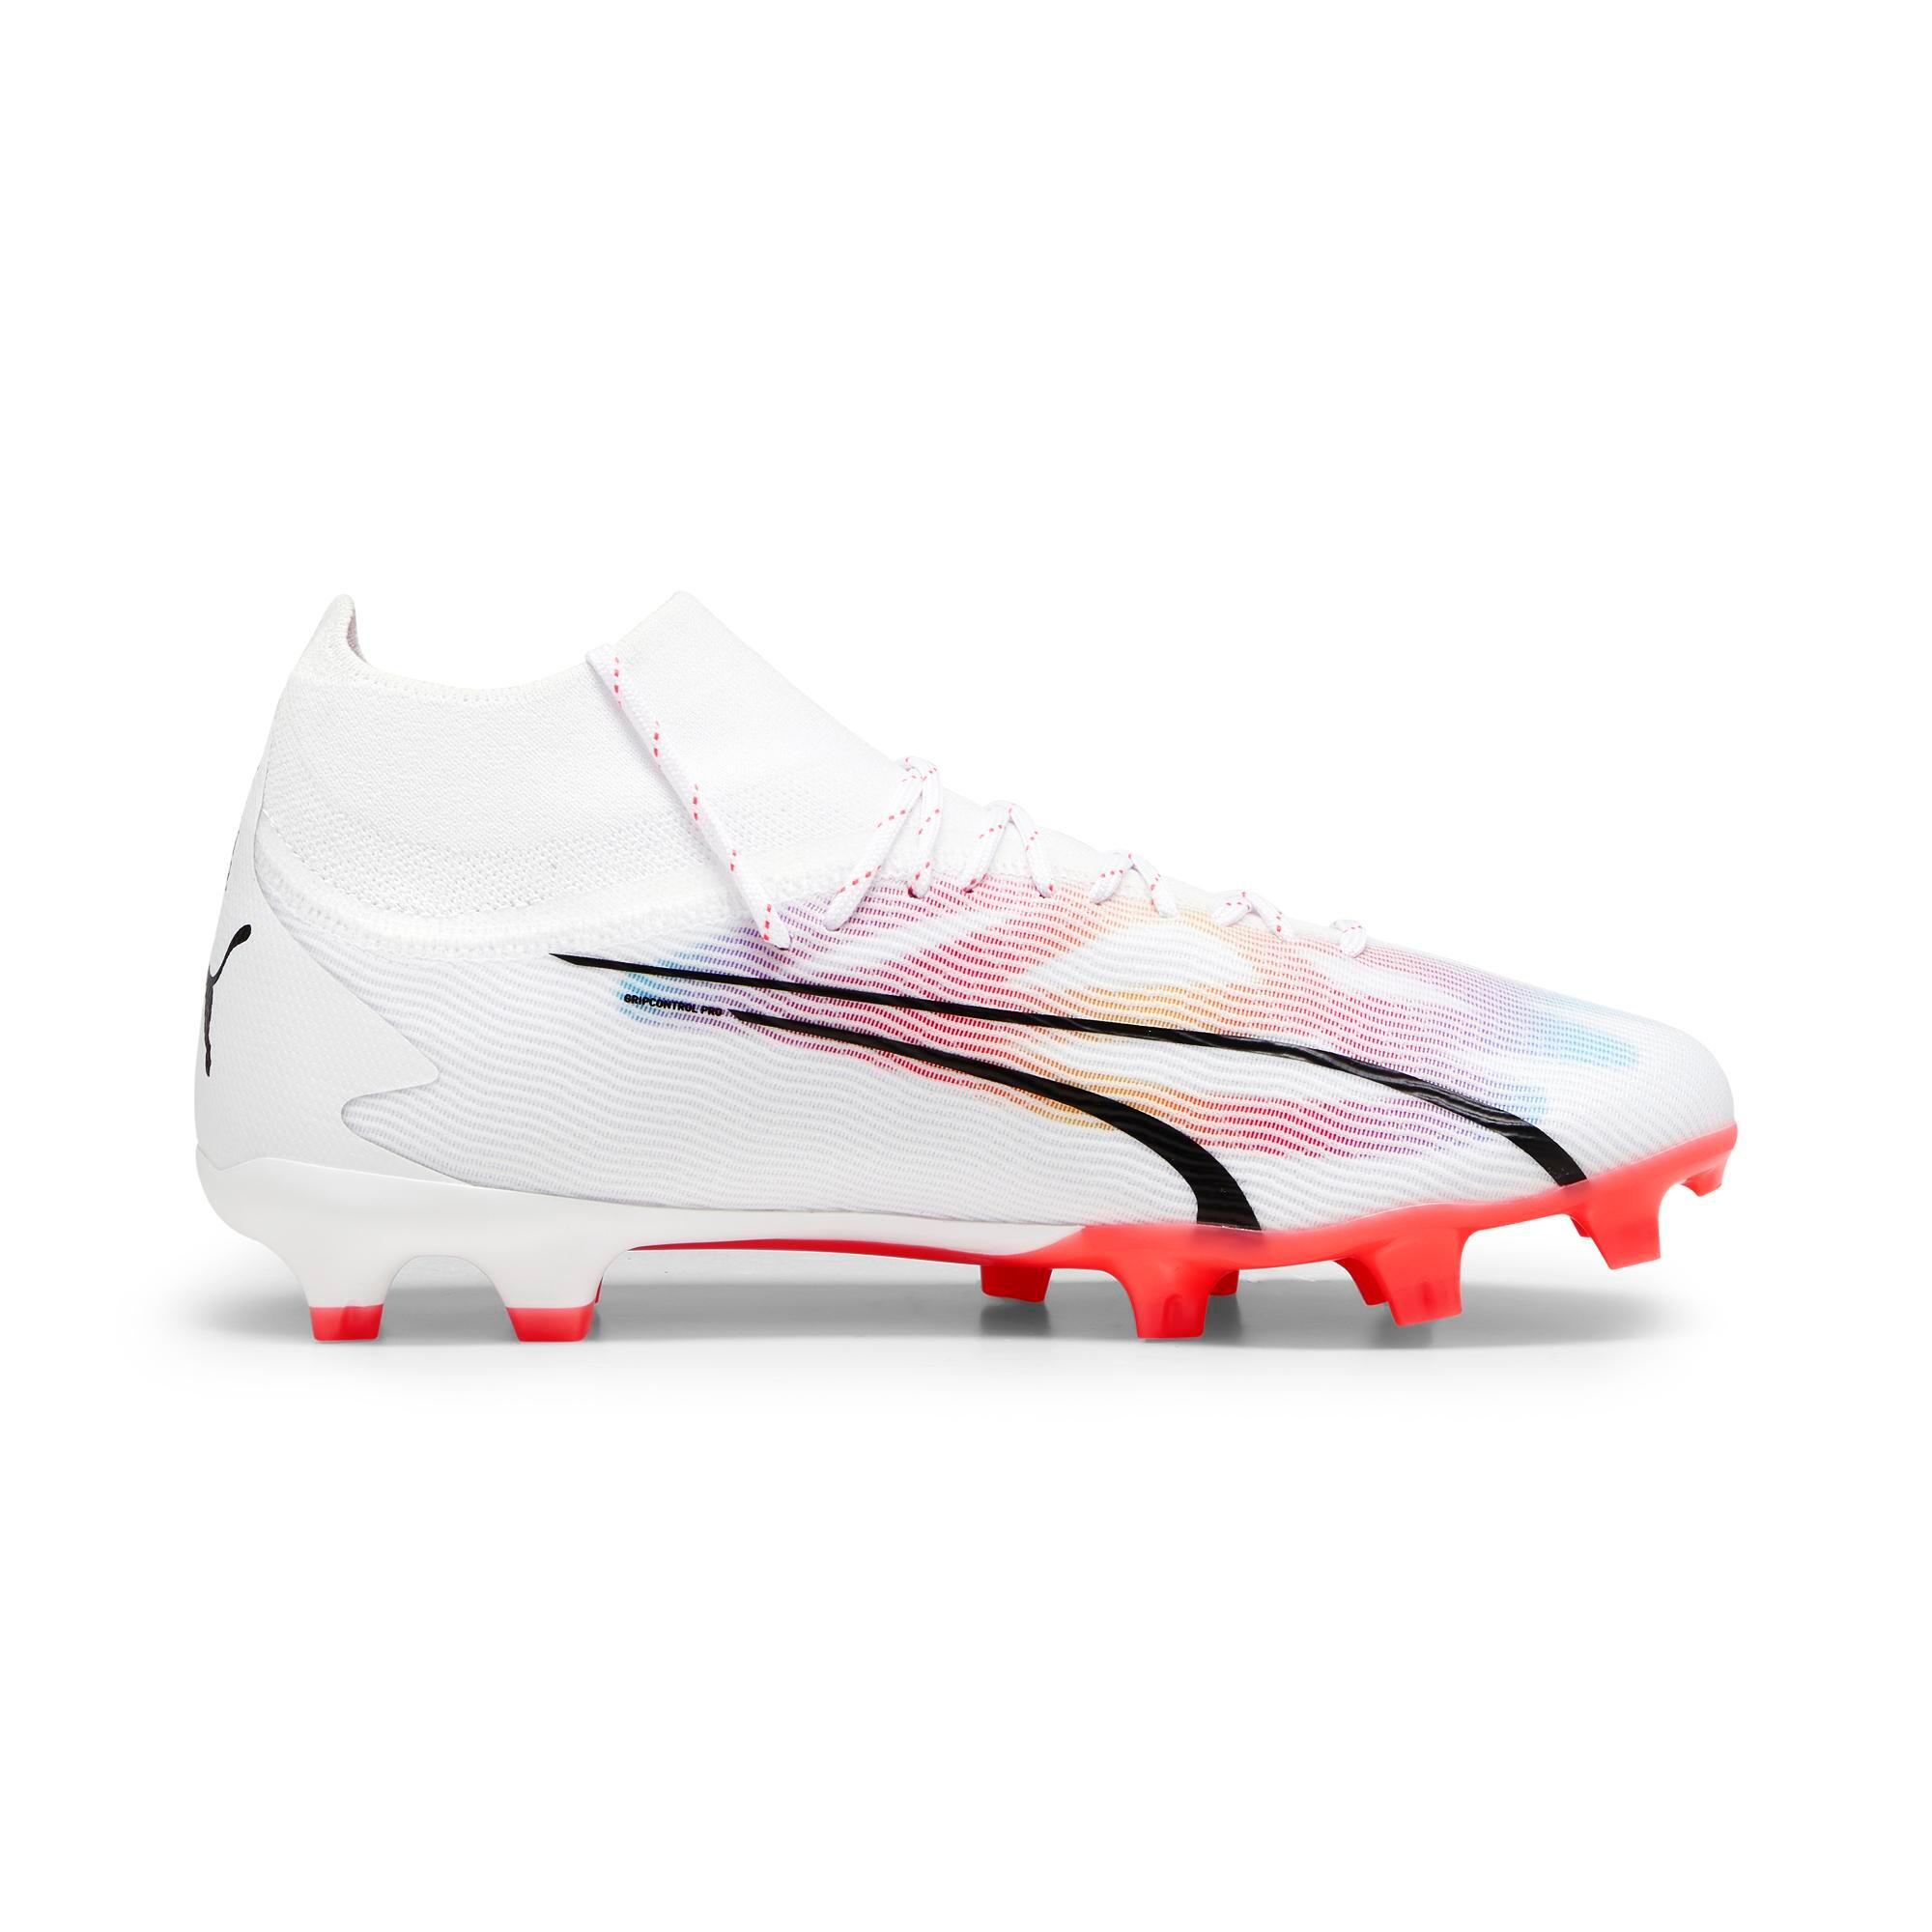 Adult FG/AG Future.2 Pro - White/Red 2/6